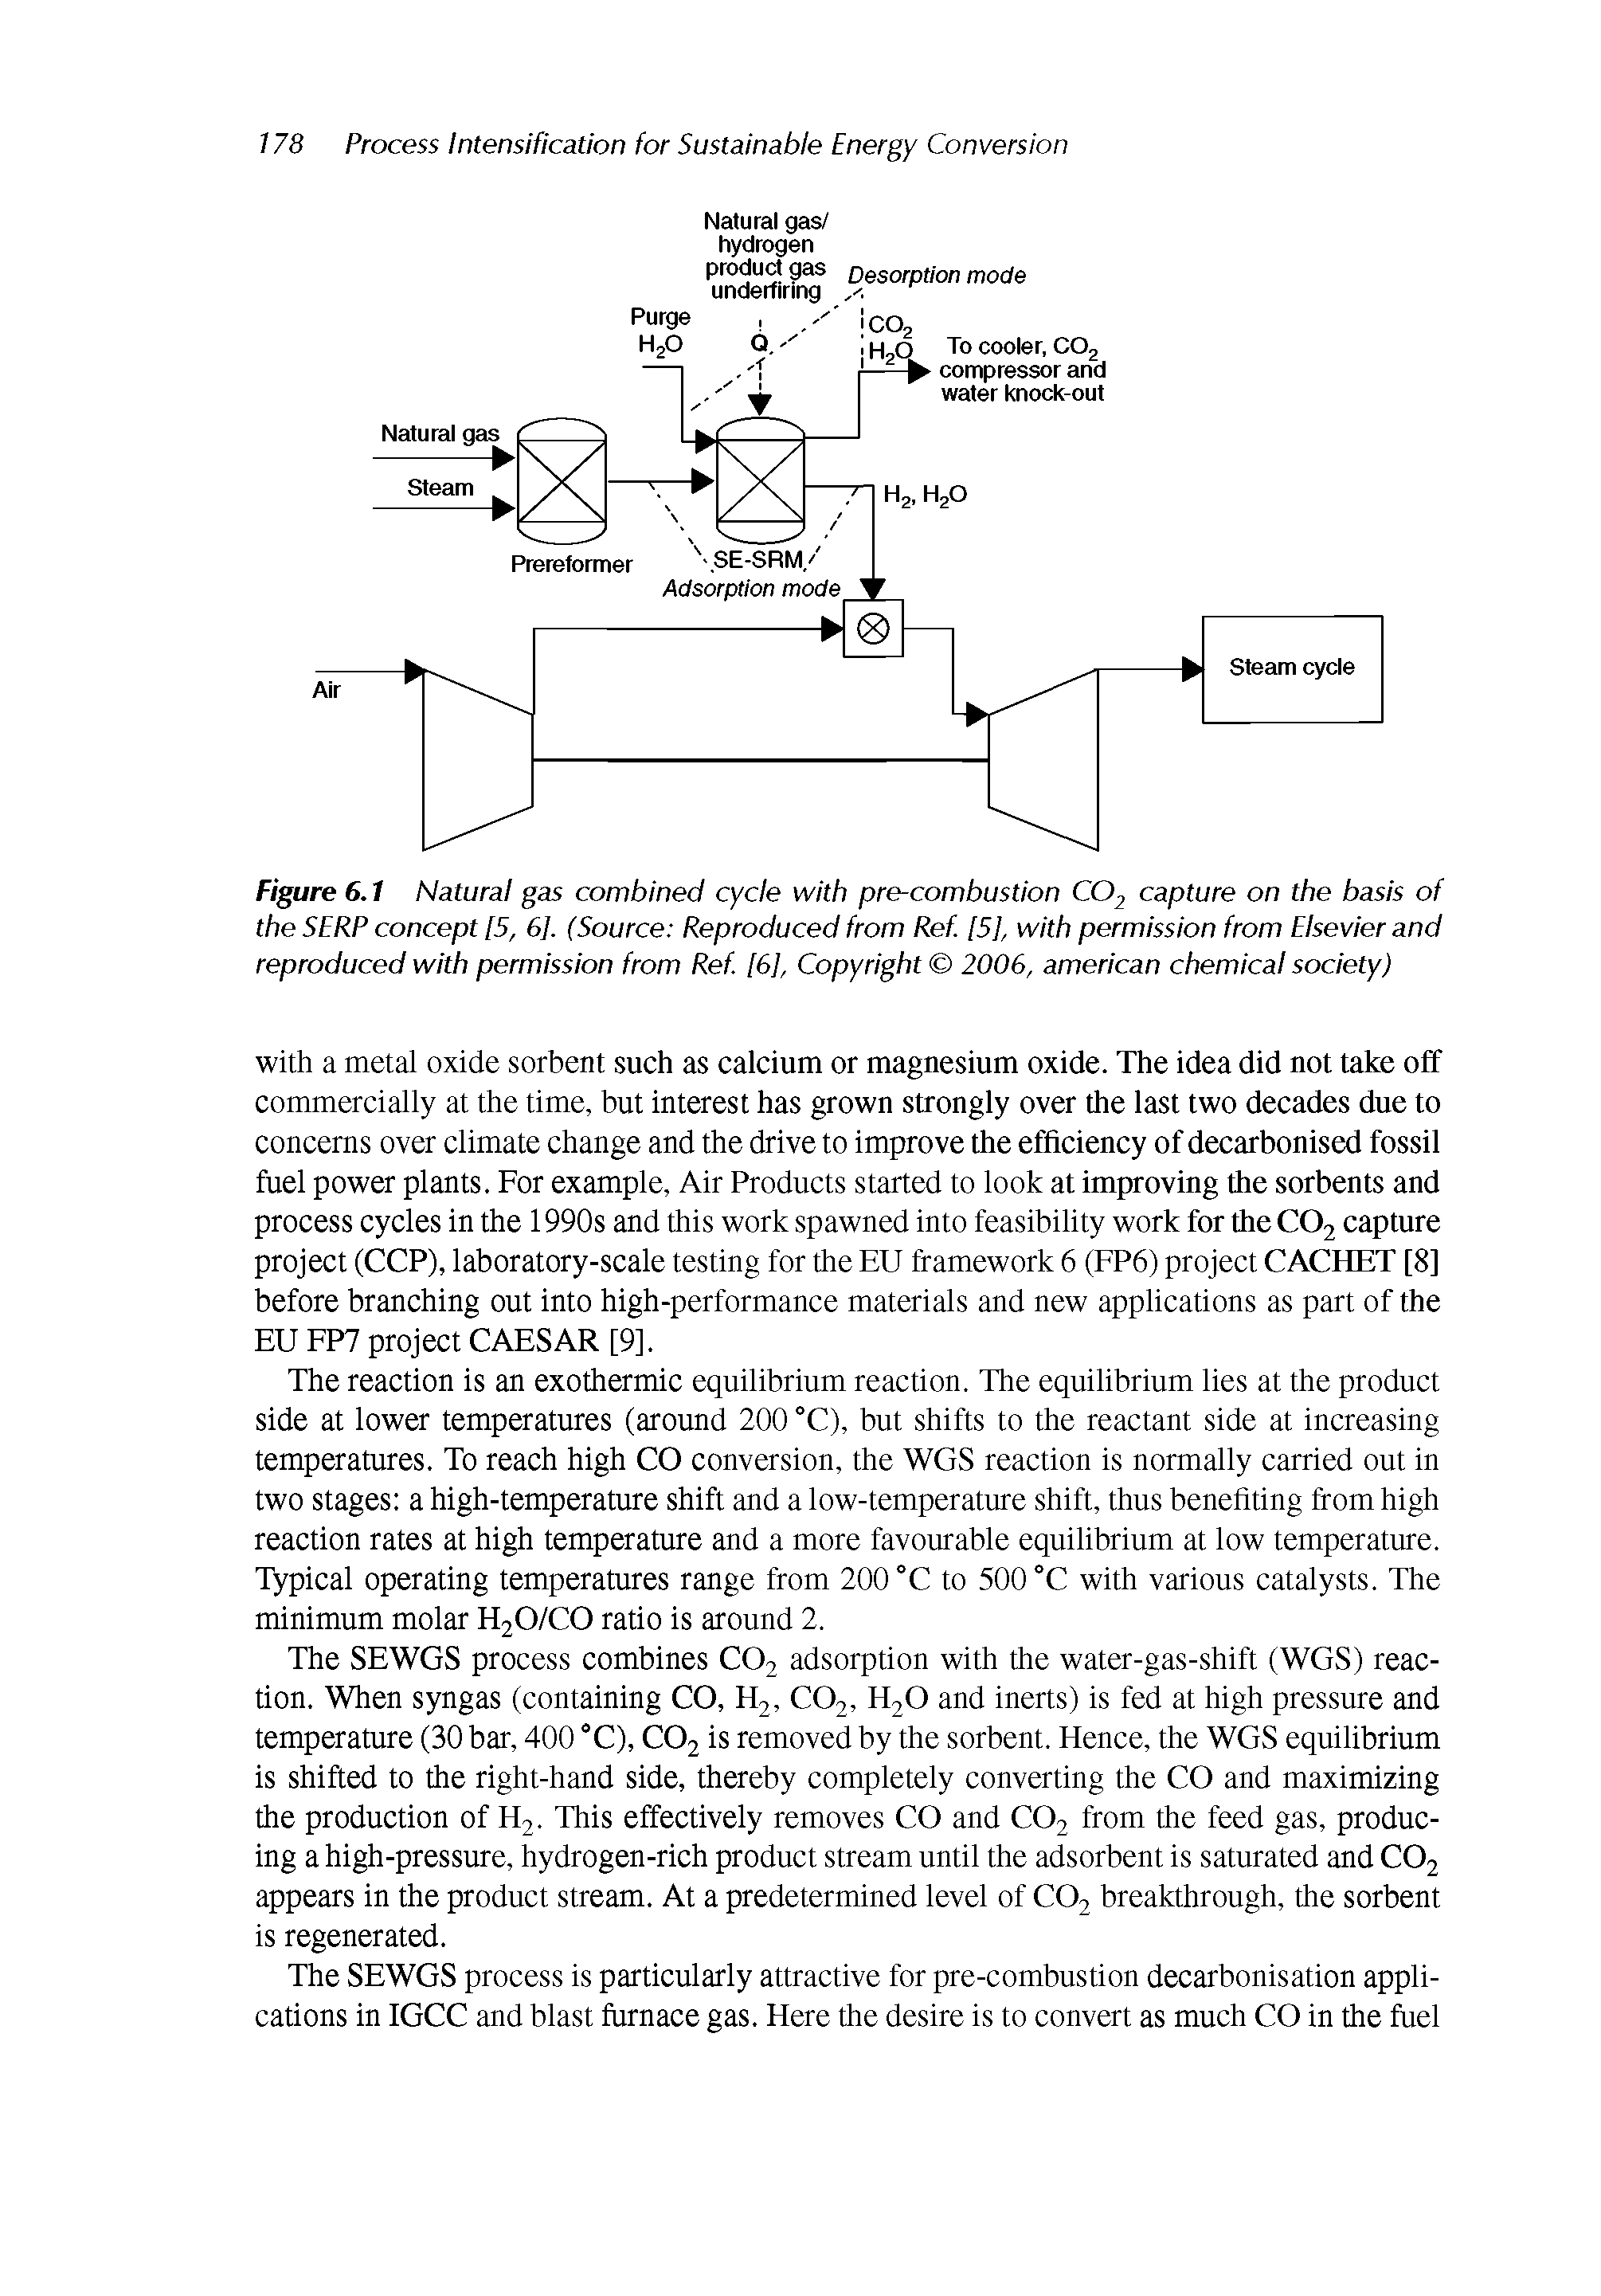 Figure 6.1 Natural gas combined cycle with pre-combustion CO2 capture on the basis of the SERF concept [5, 6]. (Source Reproduced from Ref [5], with permission from Elsevier and reproduced with permission from Ref [61, Copyright 2006, american chemical society)...